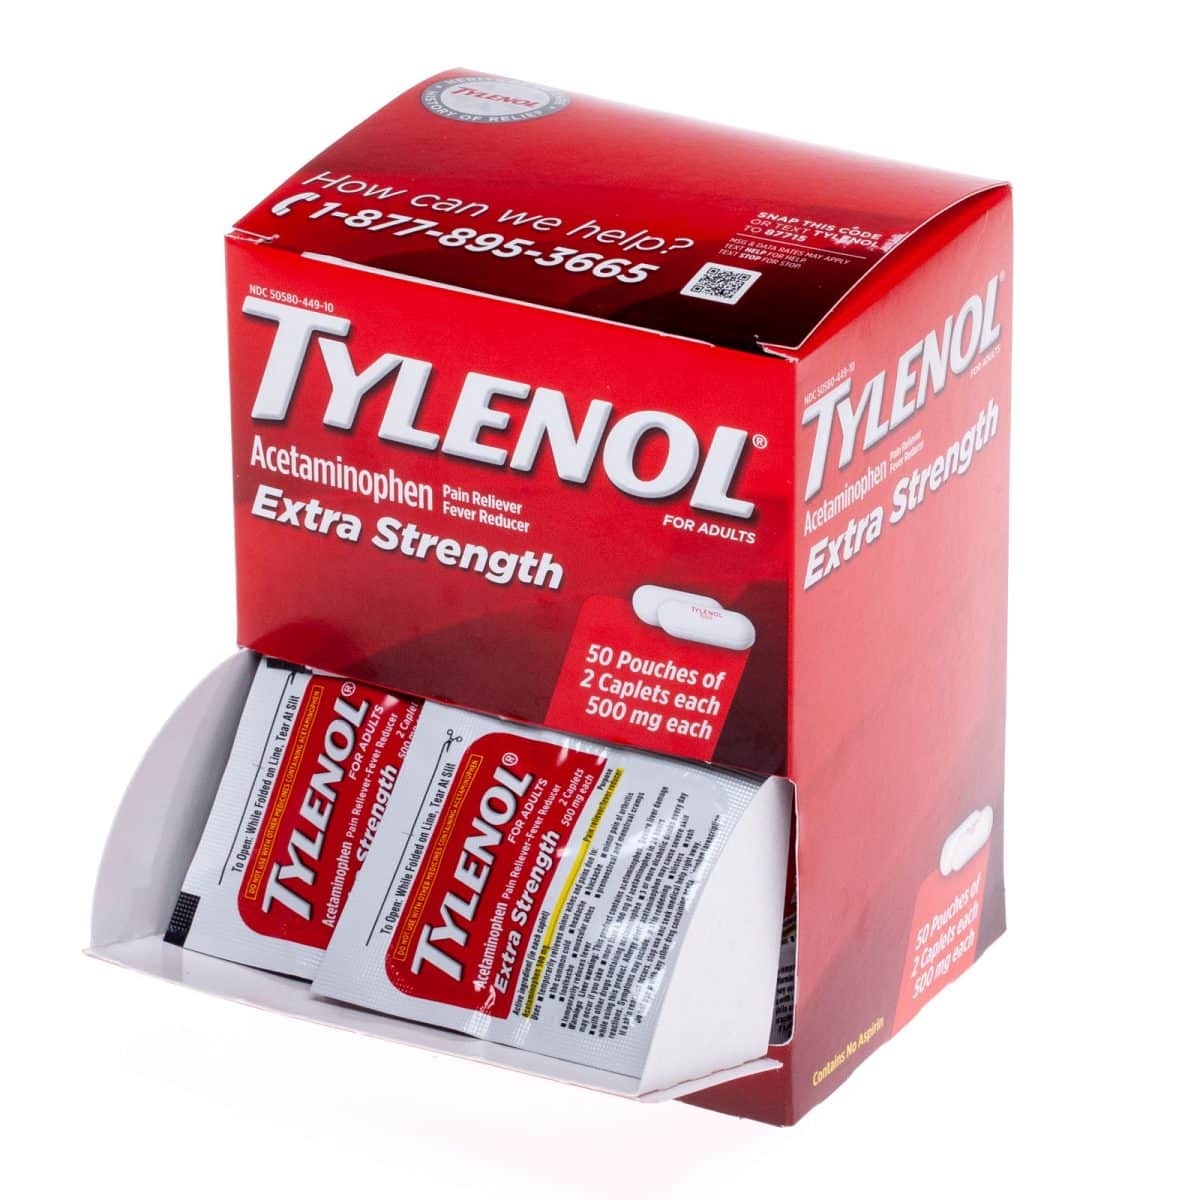 Tylenol Extra Strength Pain Reliever Fever Reducer 50 pouches 2 Caplets ...